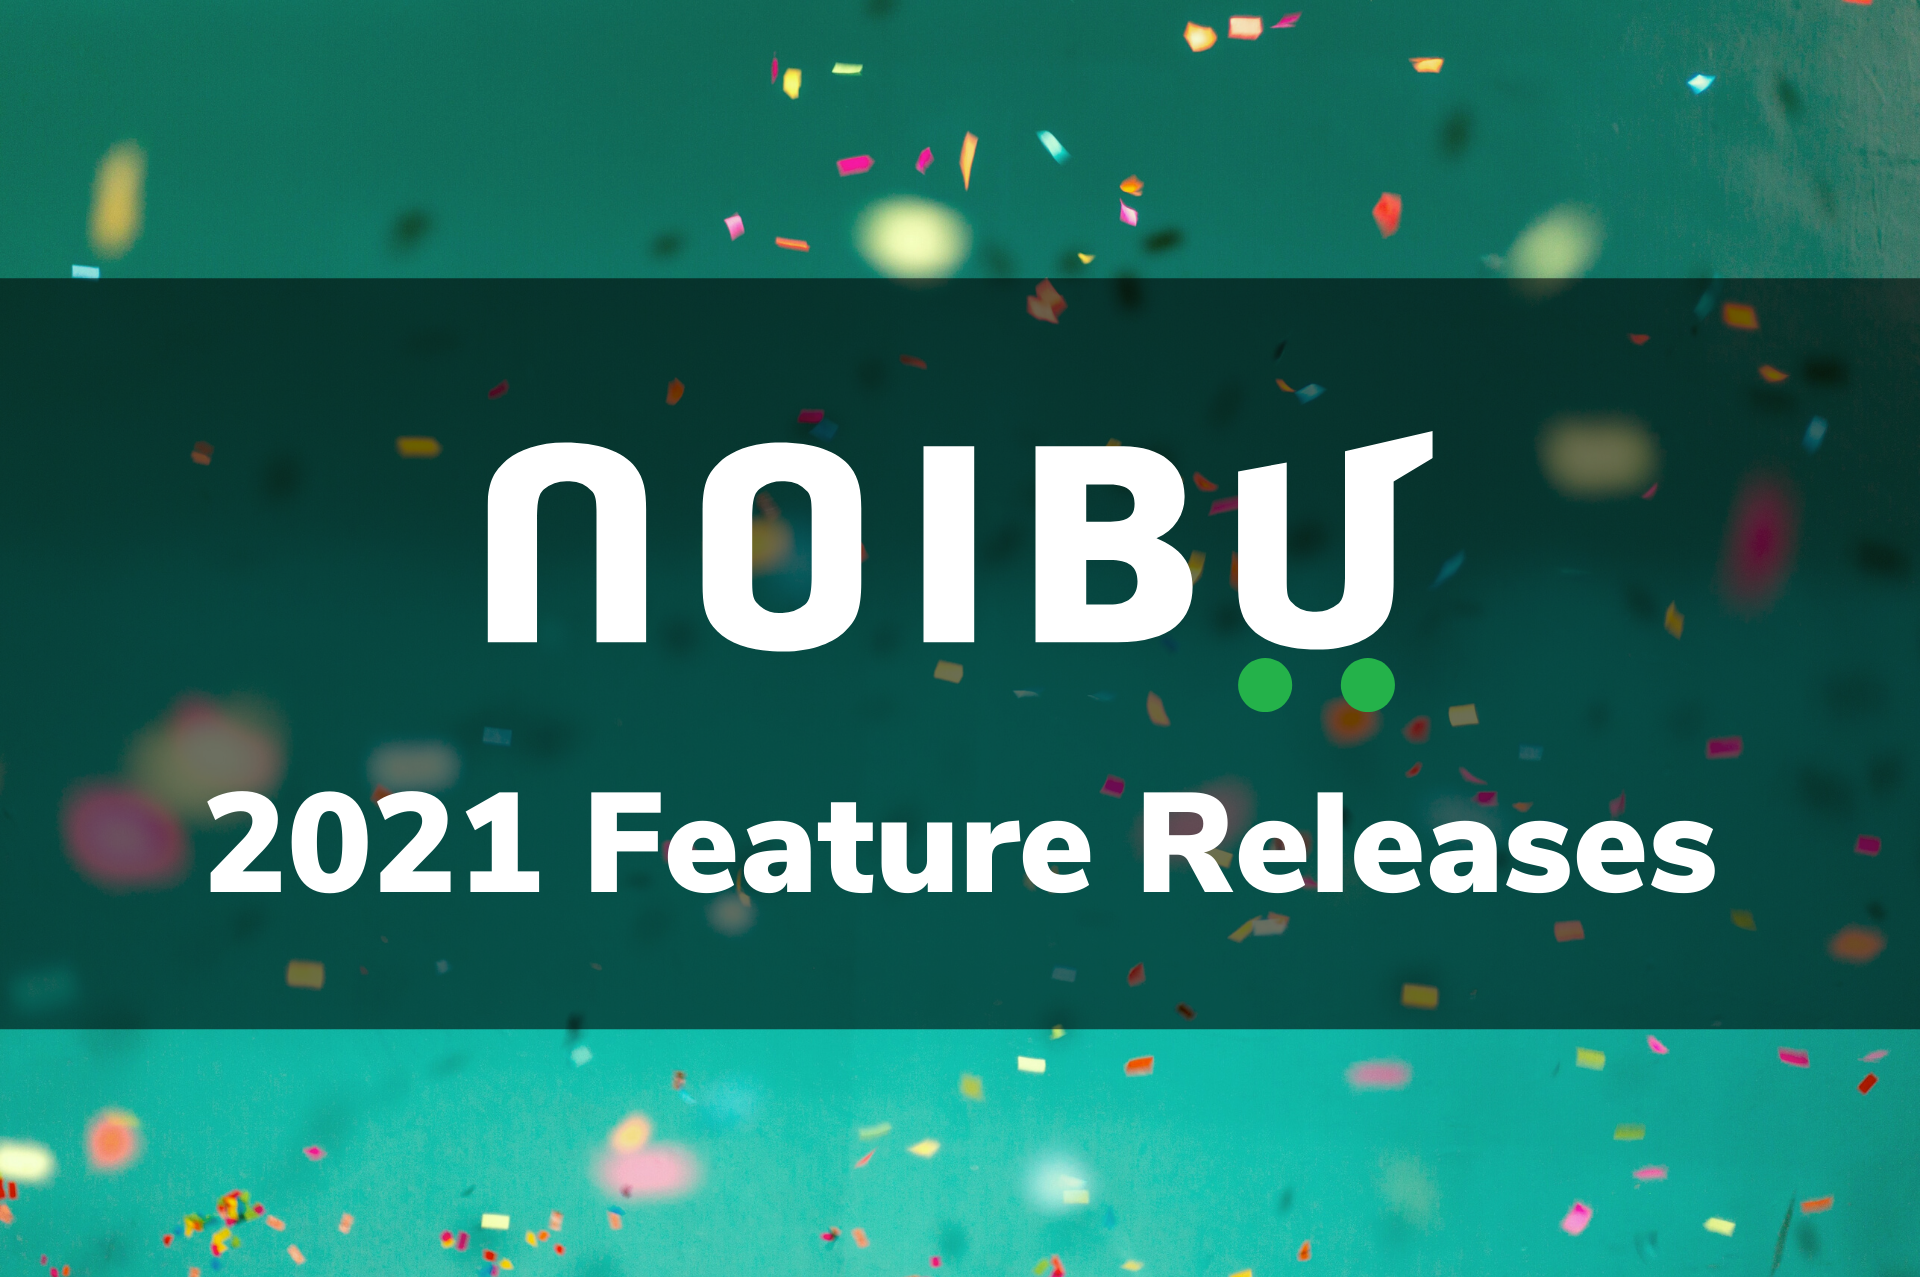 Noibu 2021 Feature Releases - White text over green background with multicolored confetti